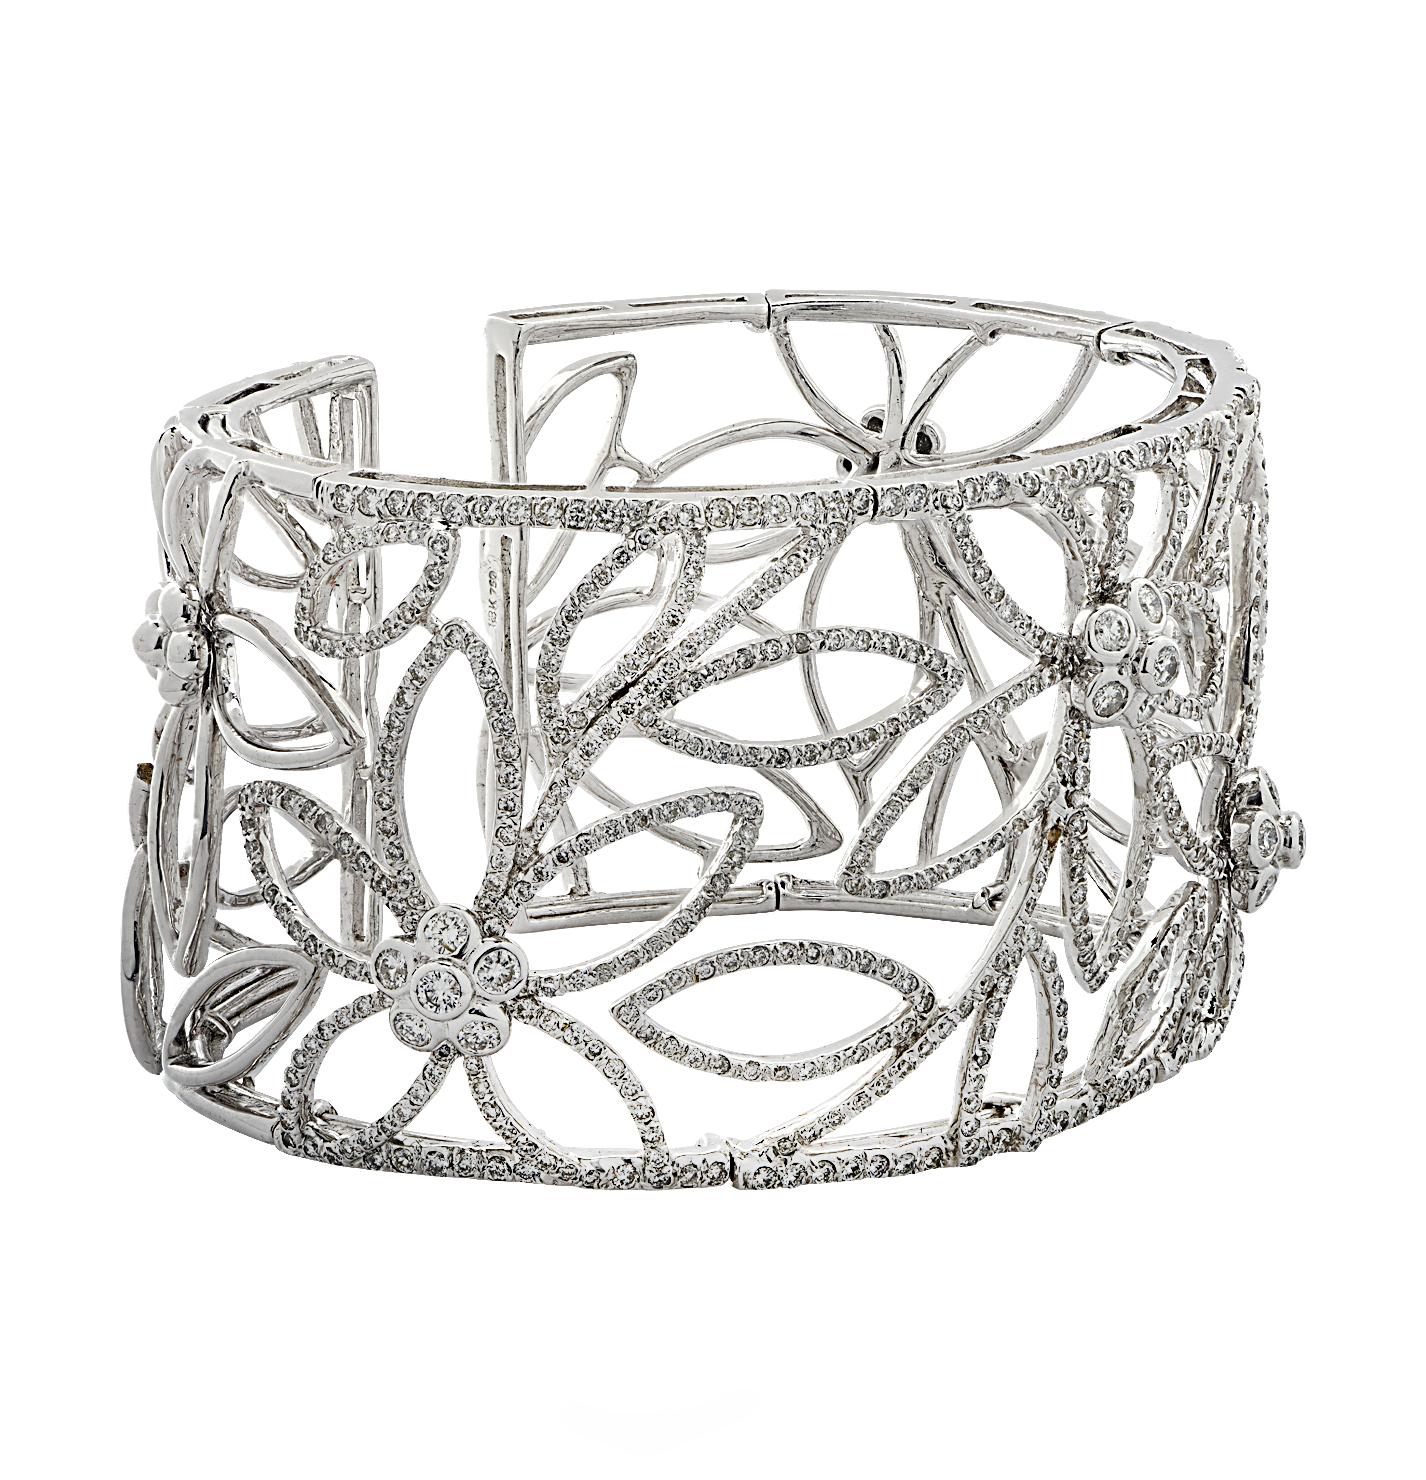 Enchanting cuff bangle bracelet crafted in 18 karat white gold, featuring round brilliant cut diamonds weighing approximately 4.84 carats total, H-I color, SI-I1 clarity. Stunning white gold diamond encrusted open work flowers wrap around the wrist,